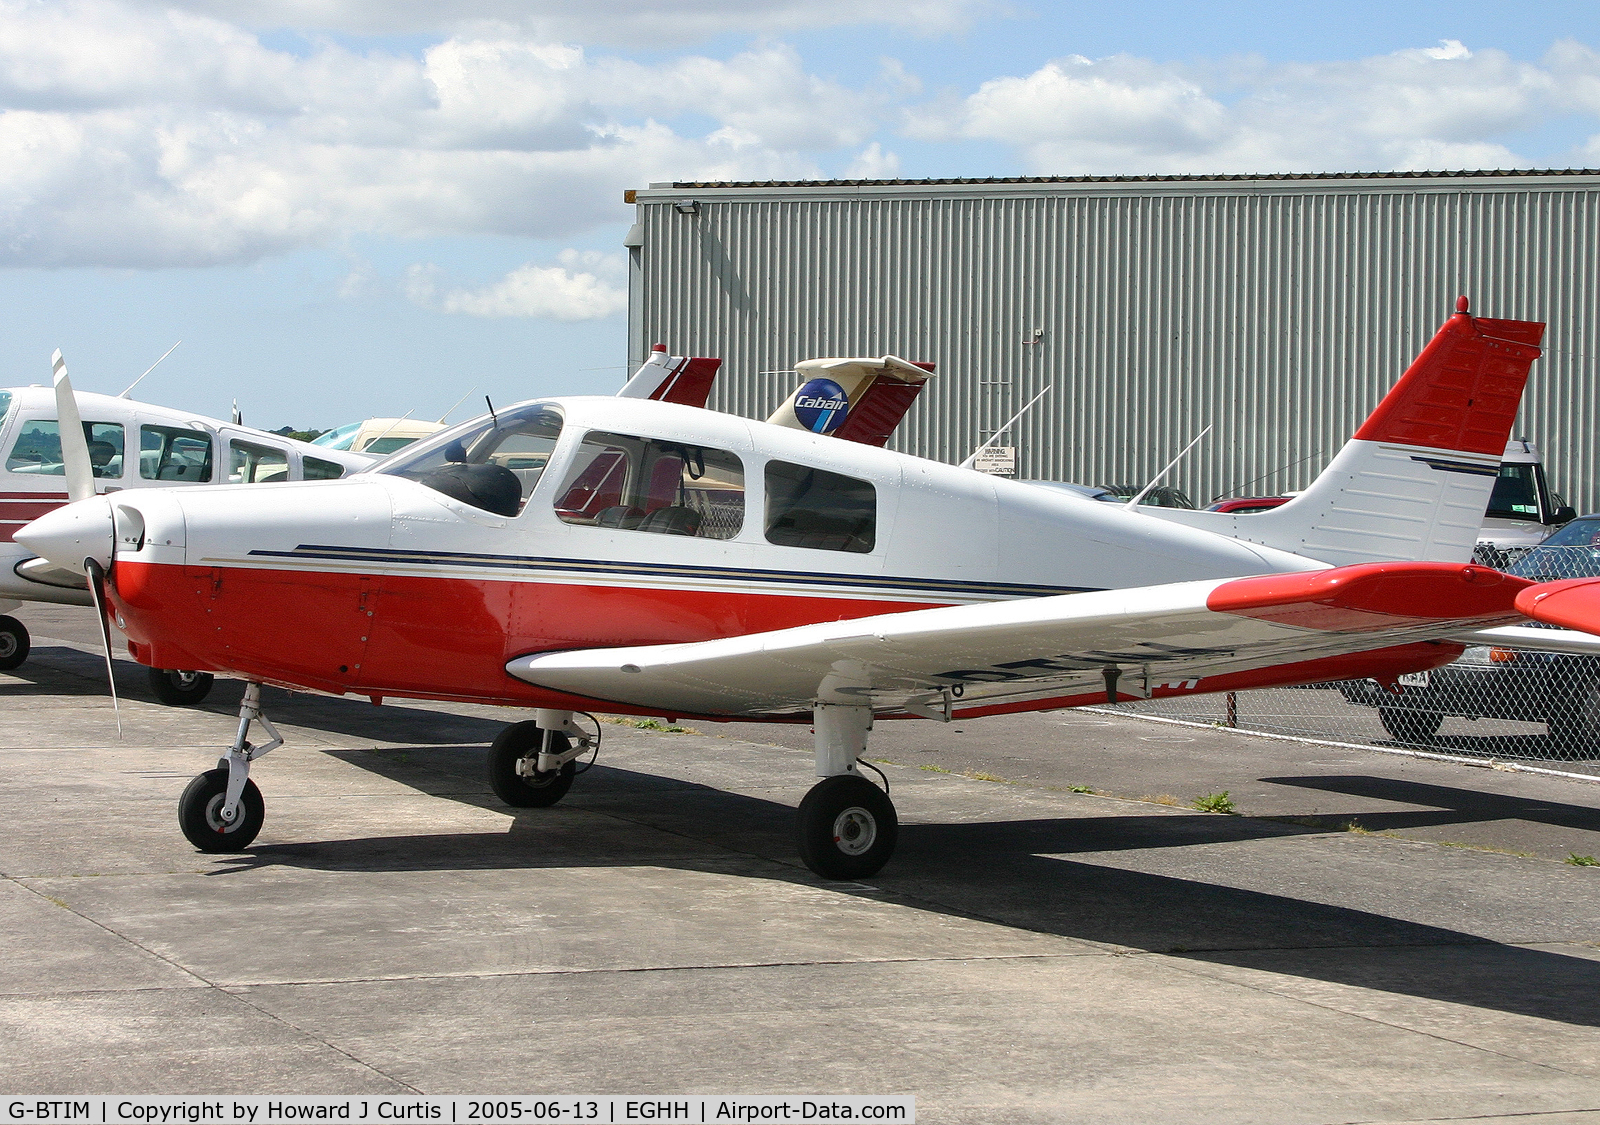 G-BTIM, 1989 Piper PA-28-161 Cadet C/N 2841159, Privately owned.